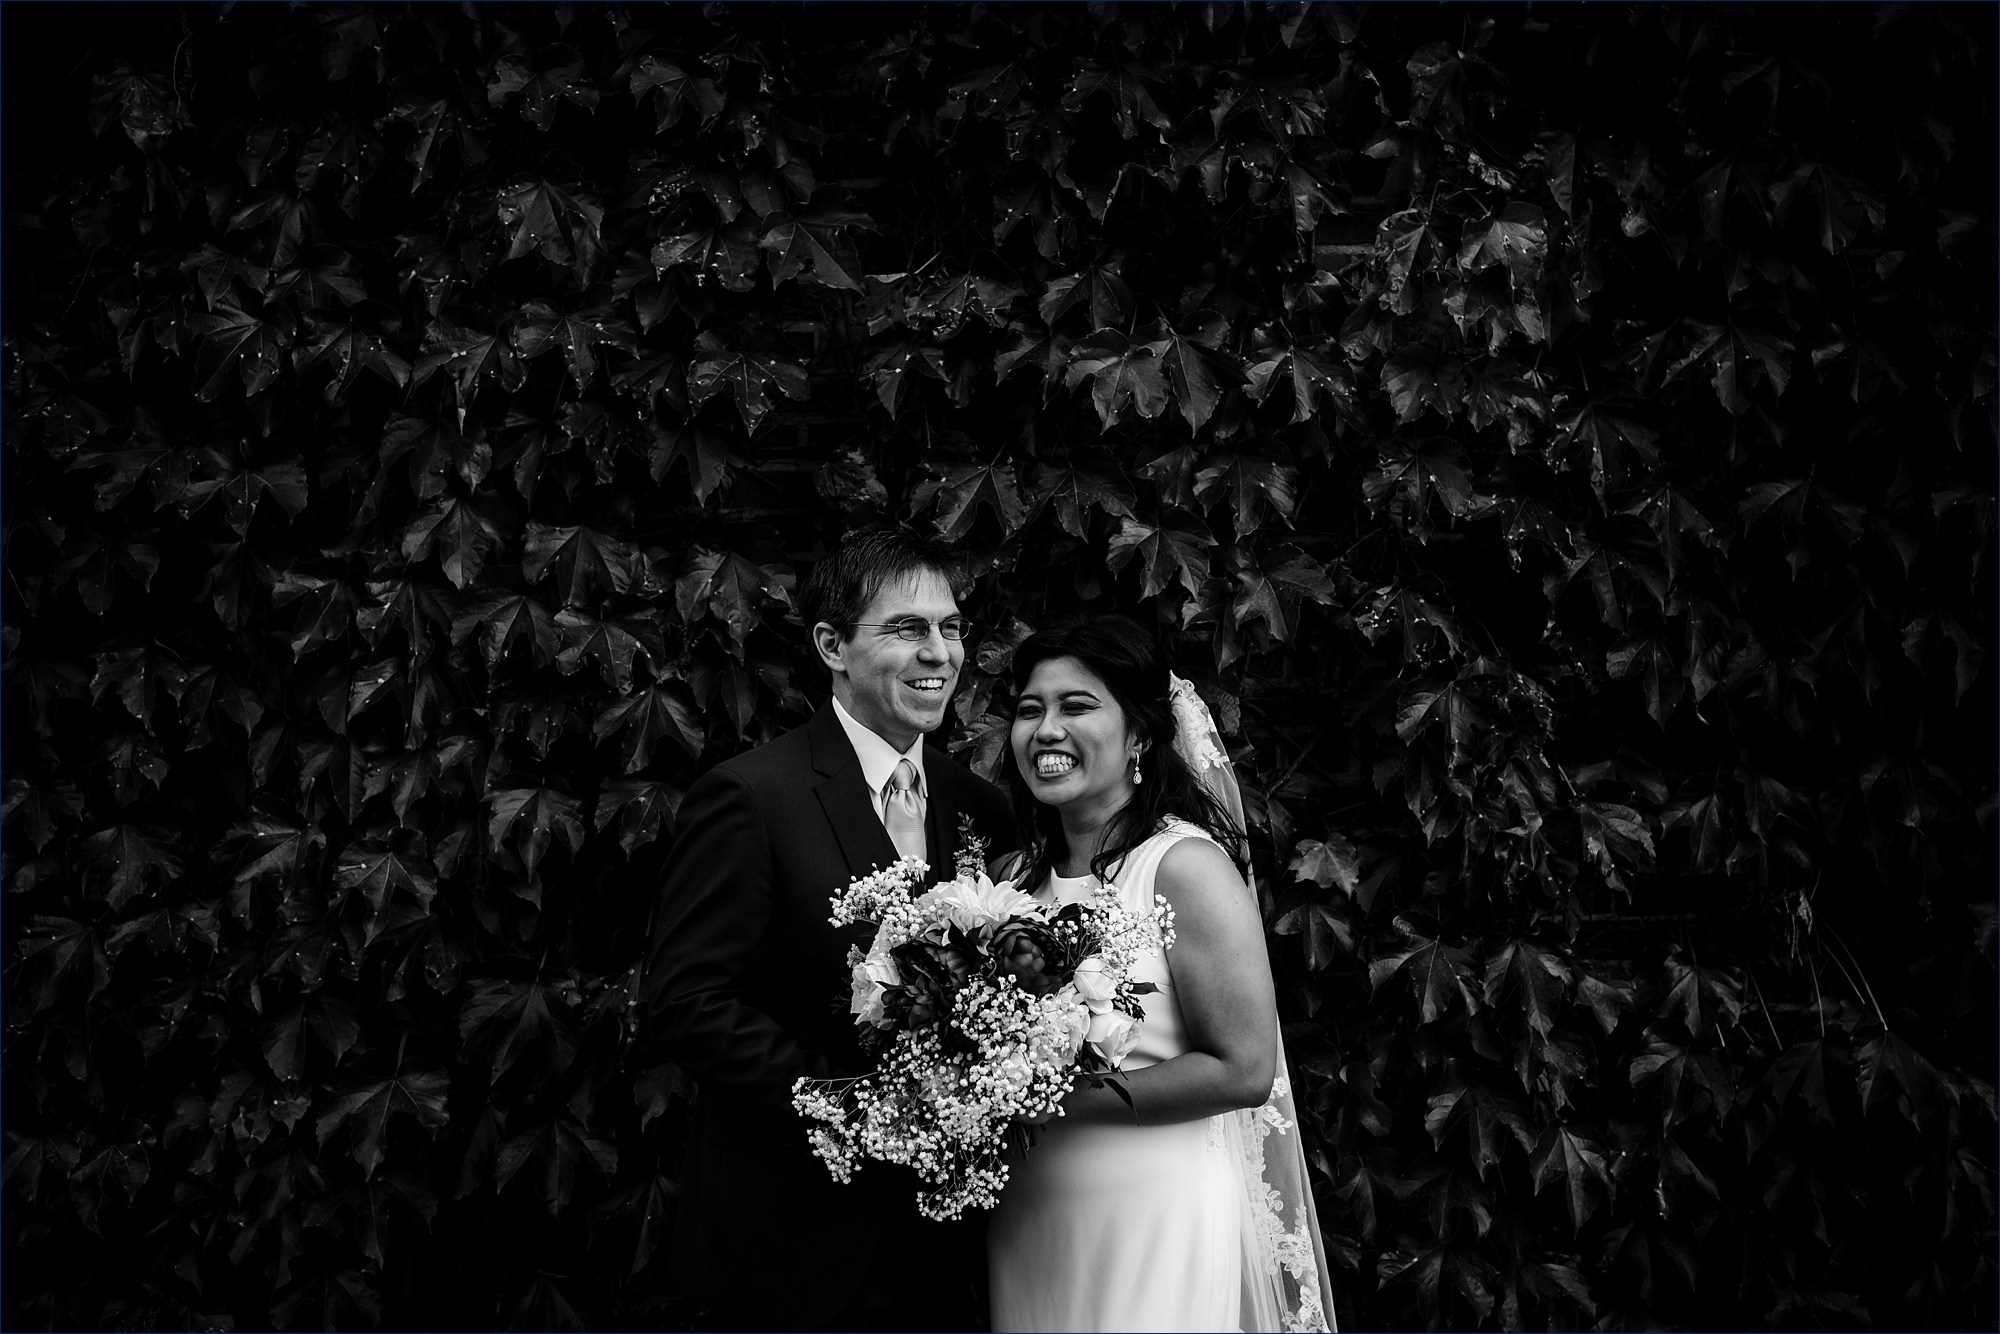 The bride and groom smile big in front of a fall colored ivy wall on the Ivy League campus in NH